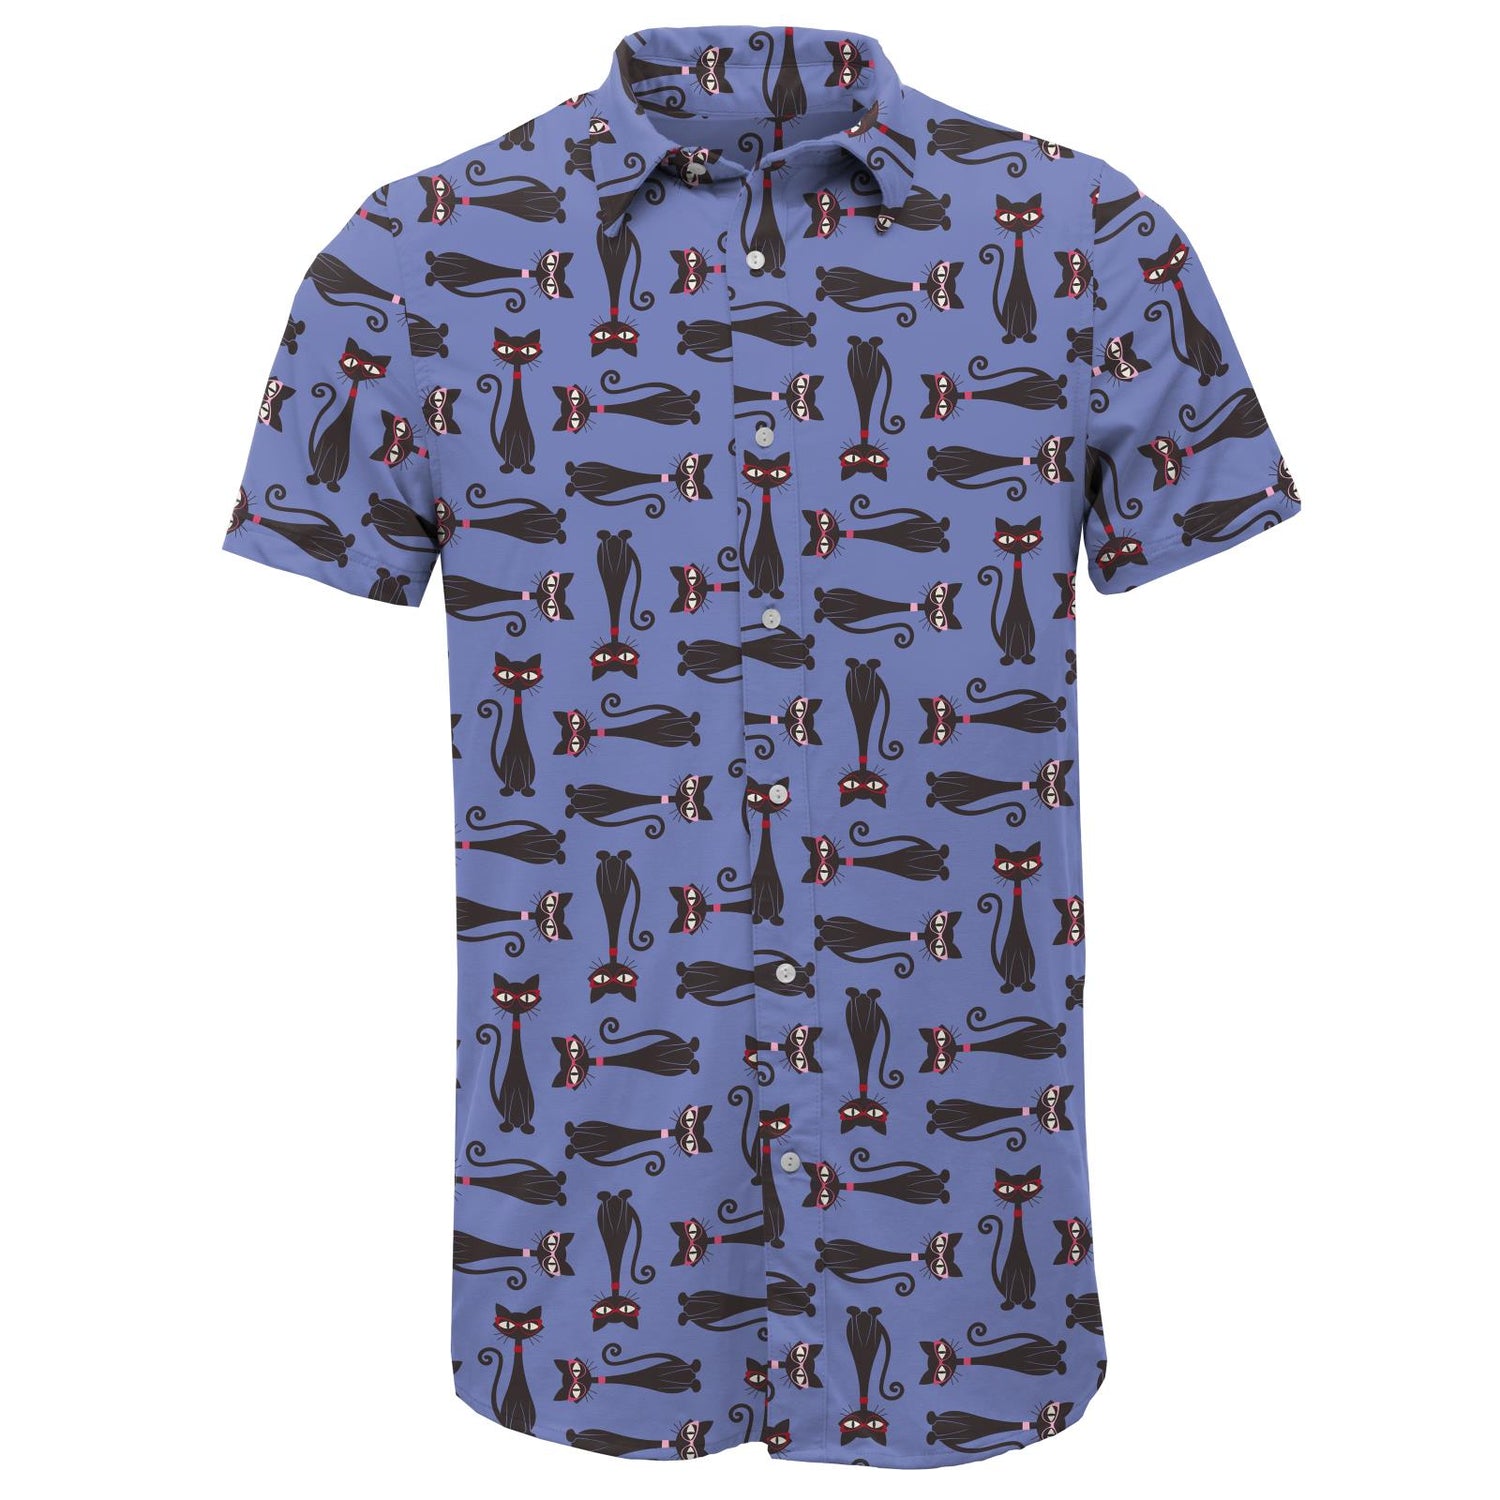 Men's Print Short Sleeve Woven Button Down Shirt in Forget Me Not Cool Cats